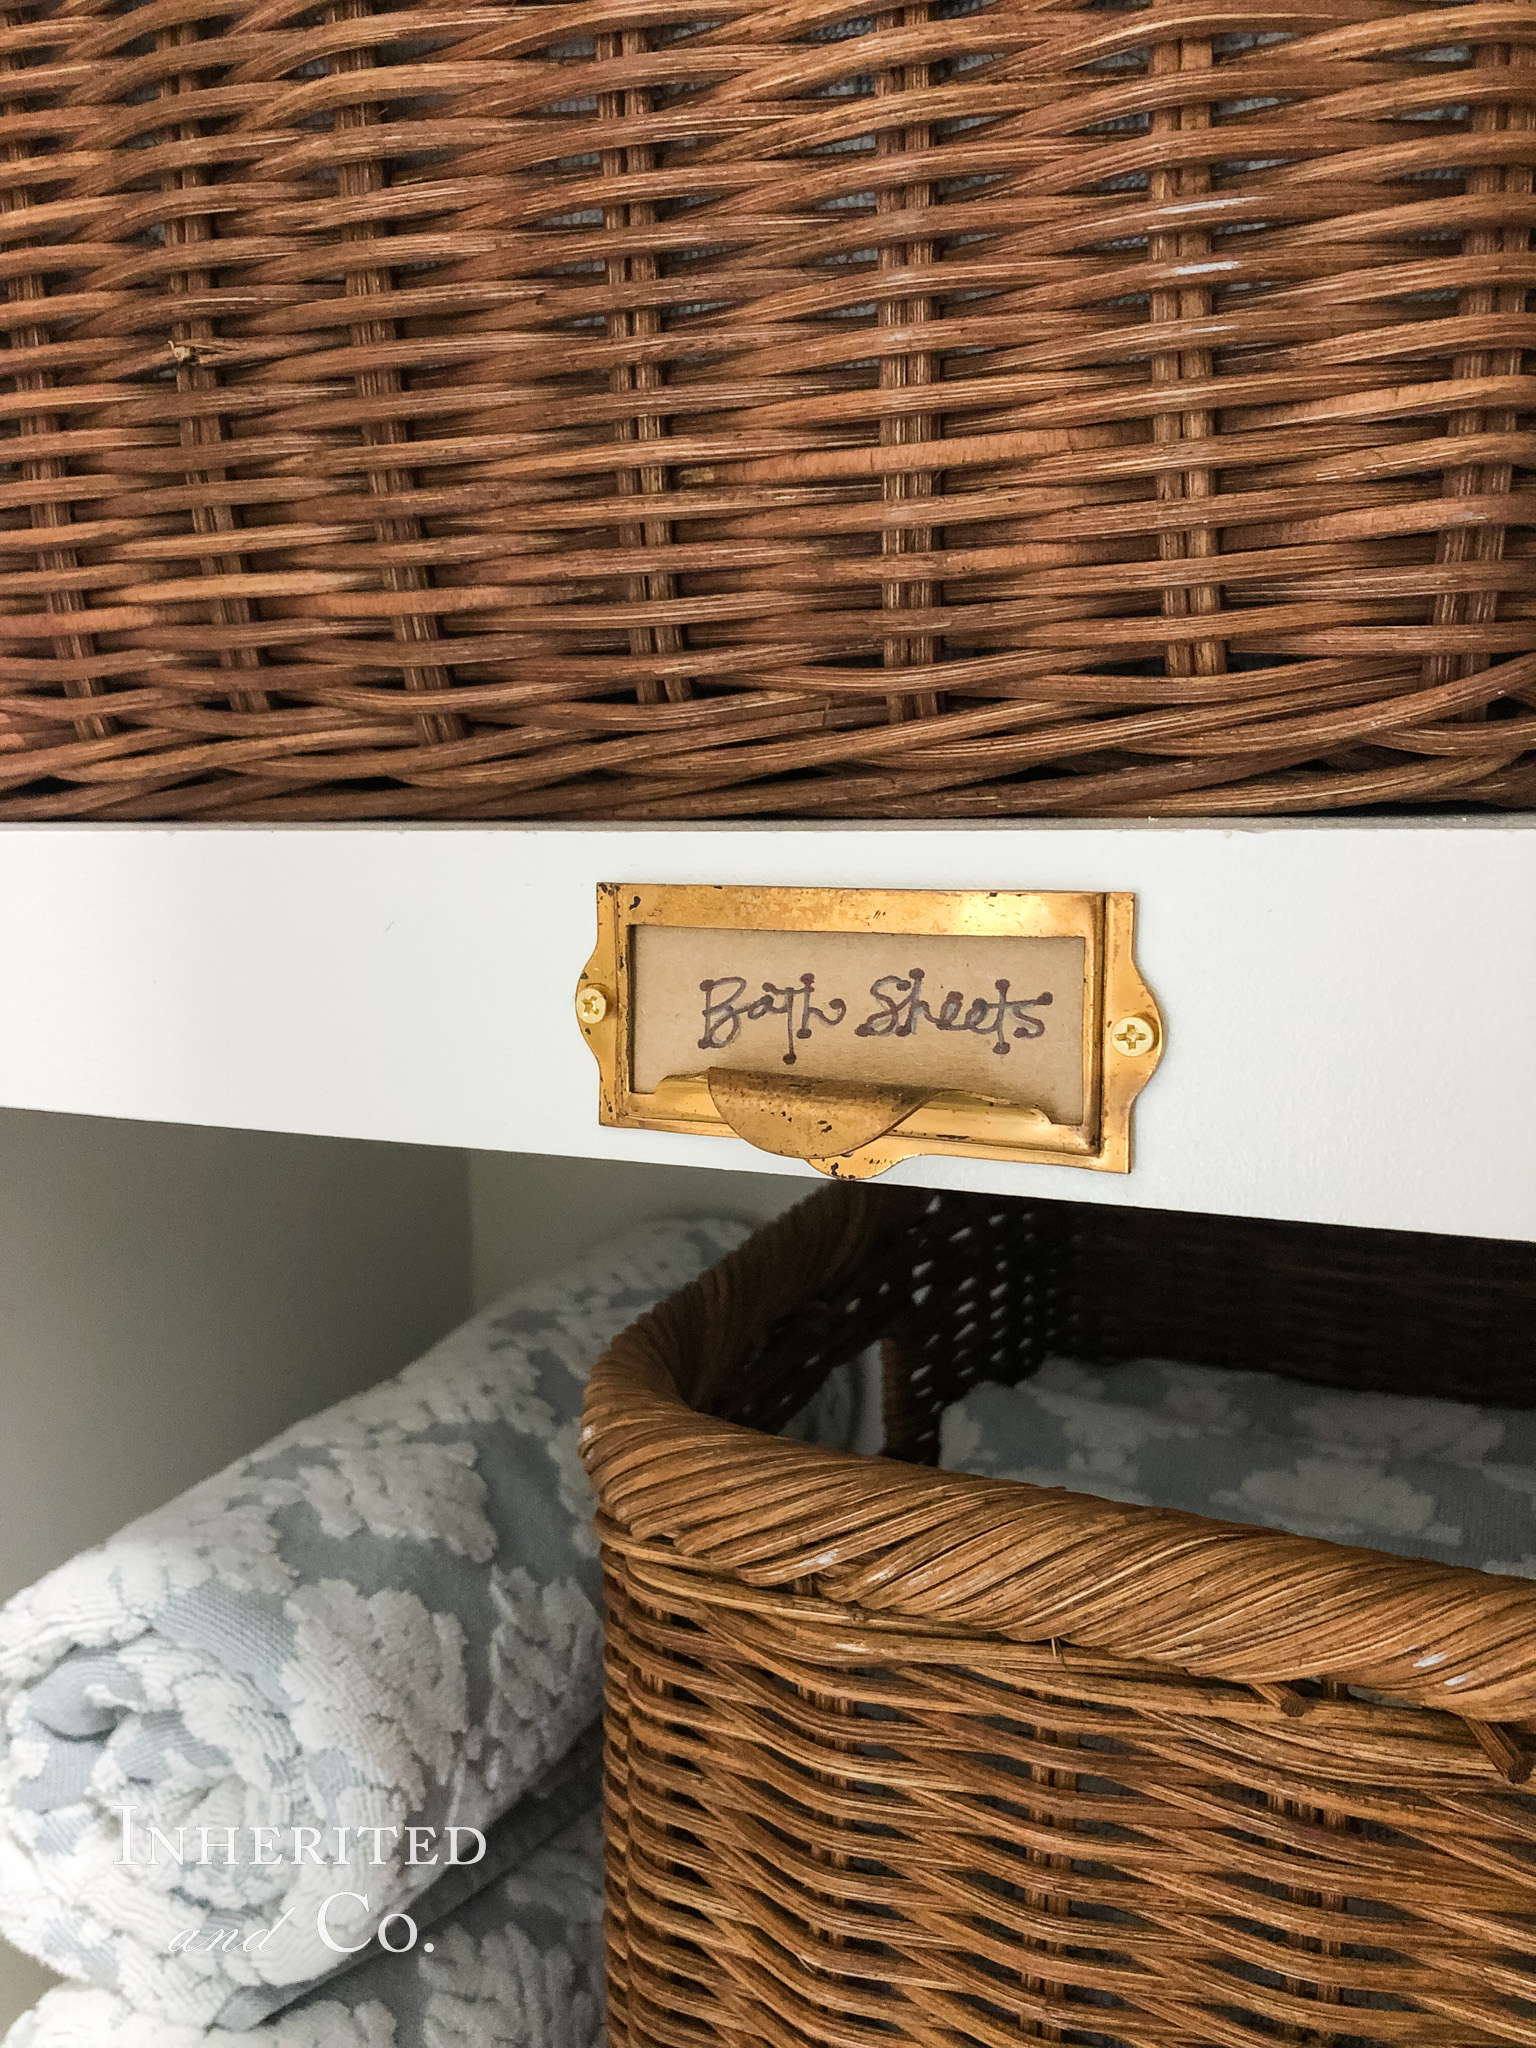 "Bath Sheets" written on a repurposed card catalog label in a linen closet